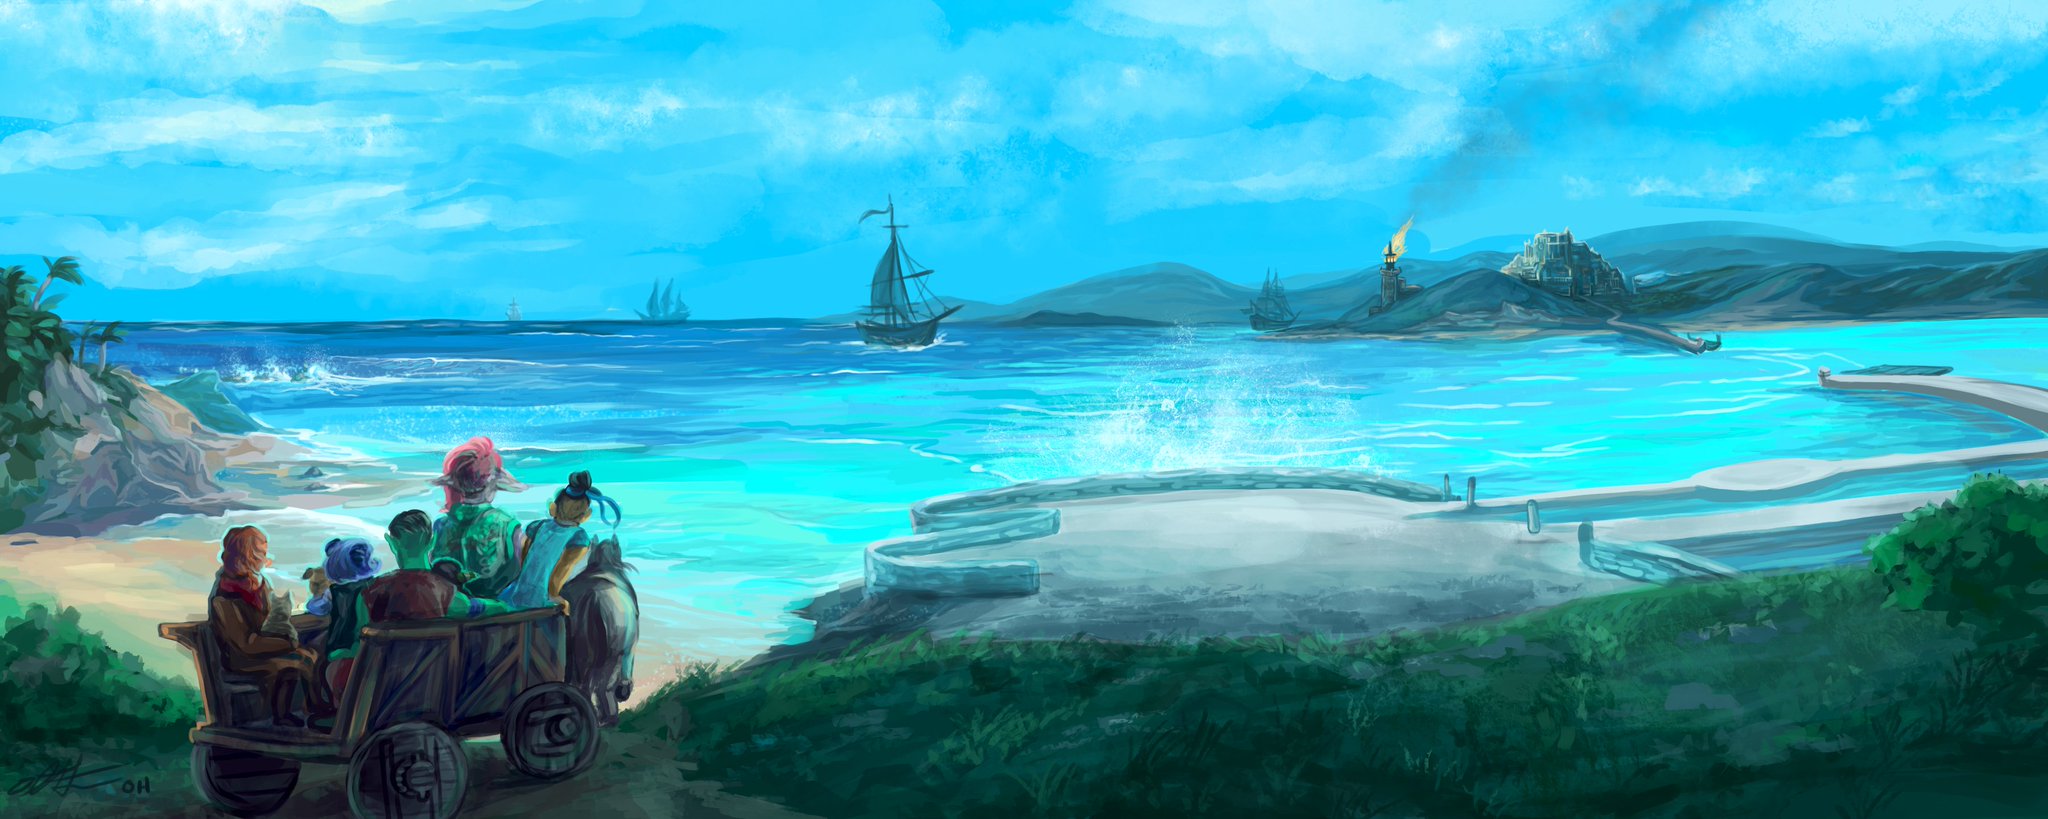 🗡-Hintz-draws-✏ on Twitter: "Arrival at the Menagerie Coast. #Nicodranas, of #Jester. #themightynein #Beachepisodeplease #criticalrolefanart #themightyzoo @CriticalRole (Twitter might have cut off some parts so please click for FULL VIEW!) https ...